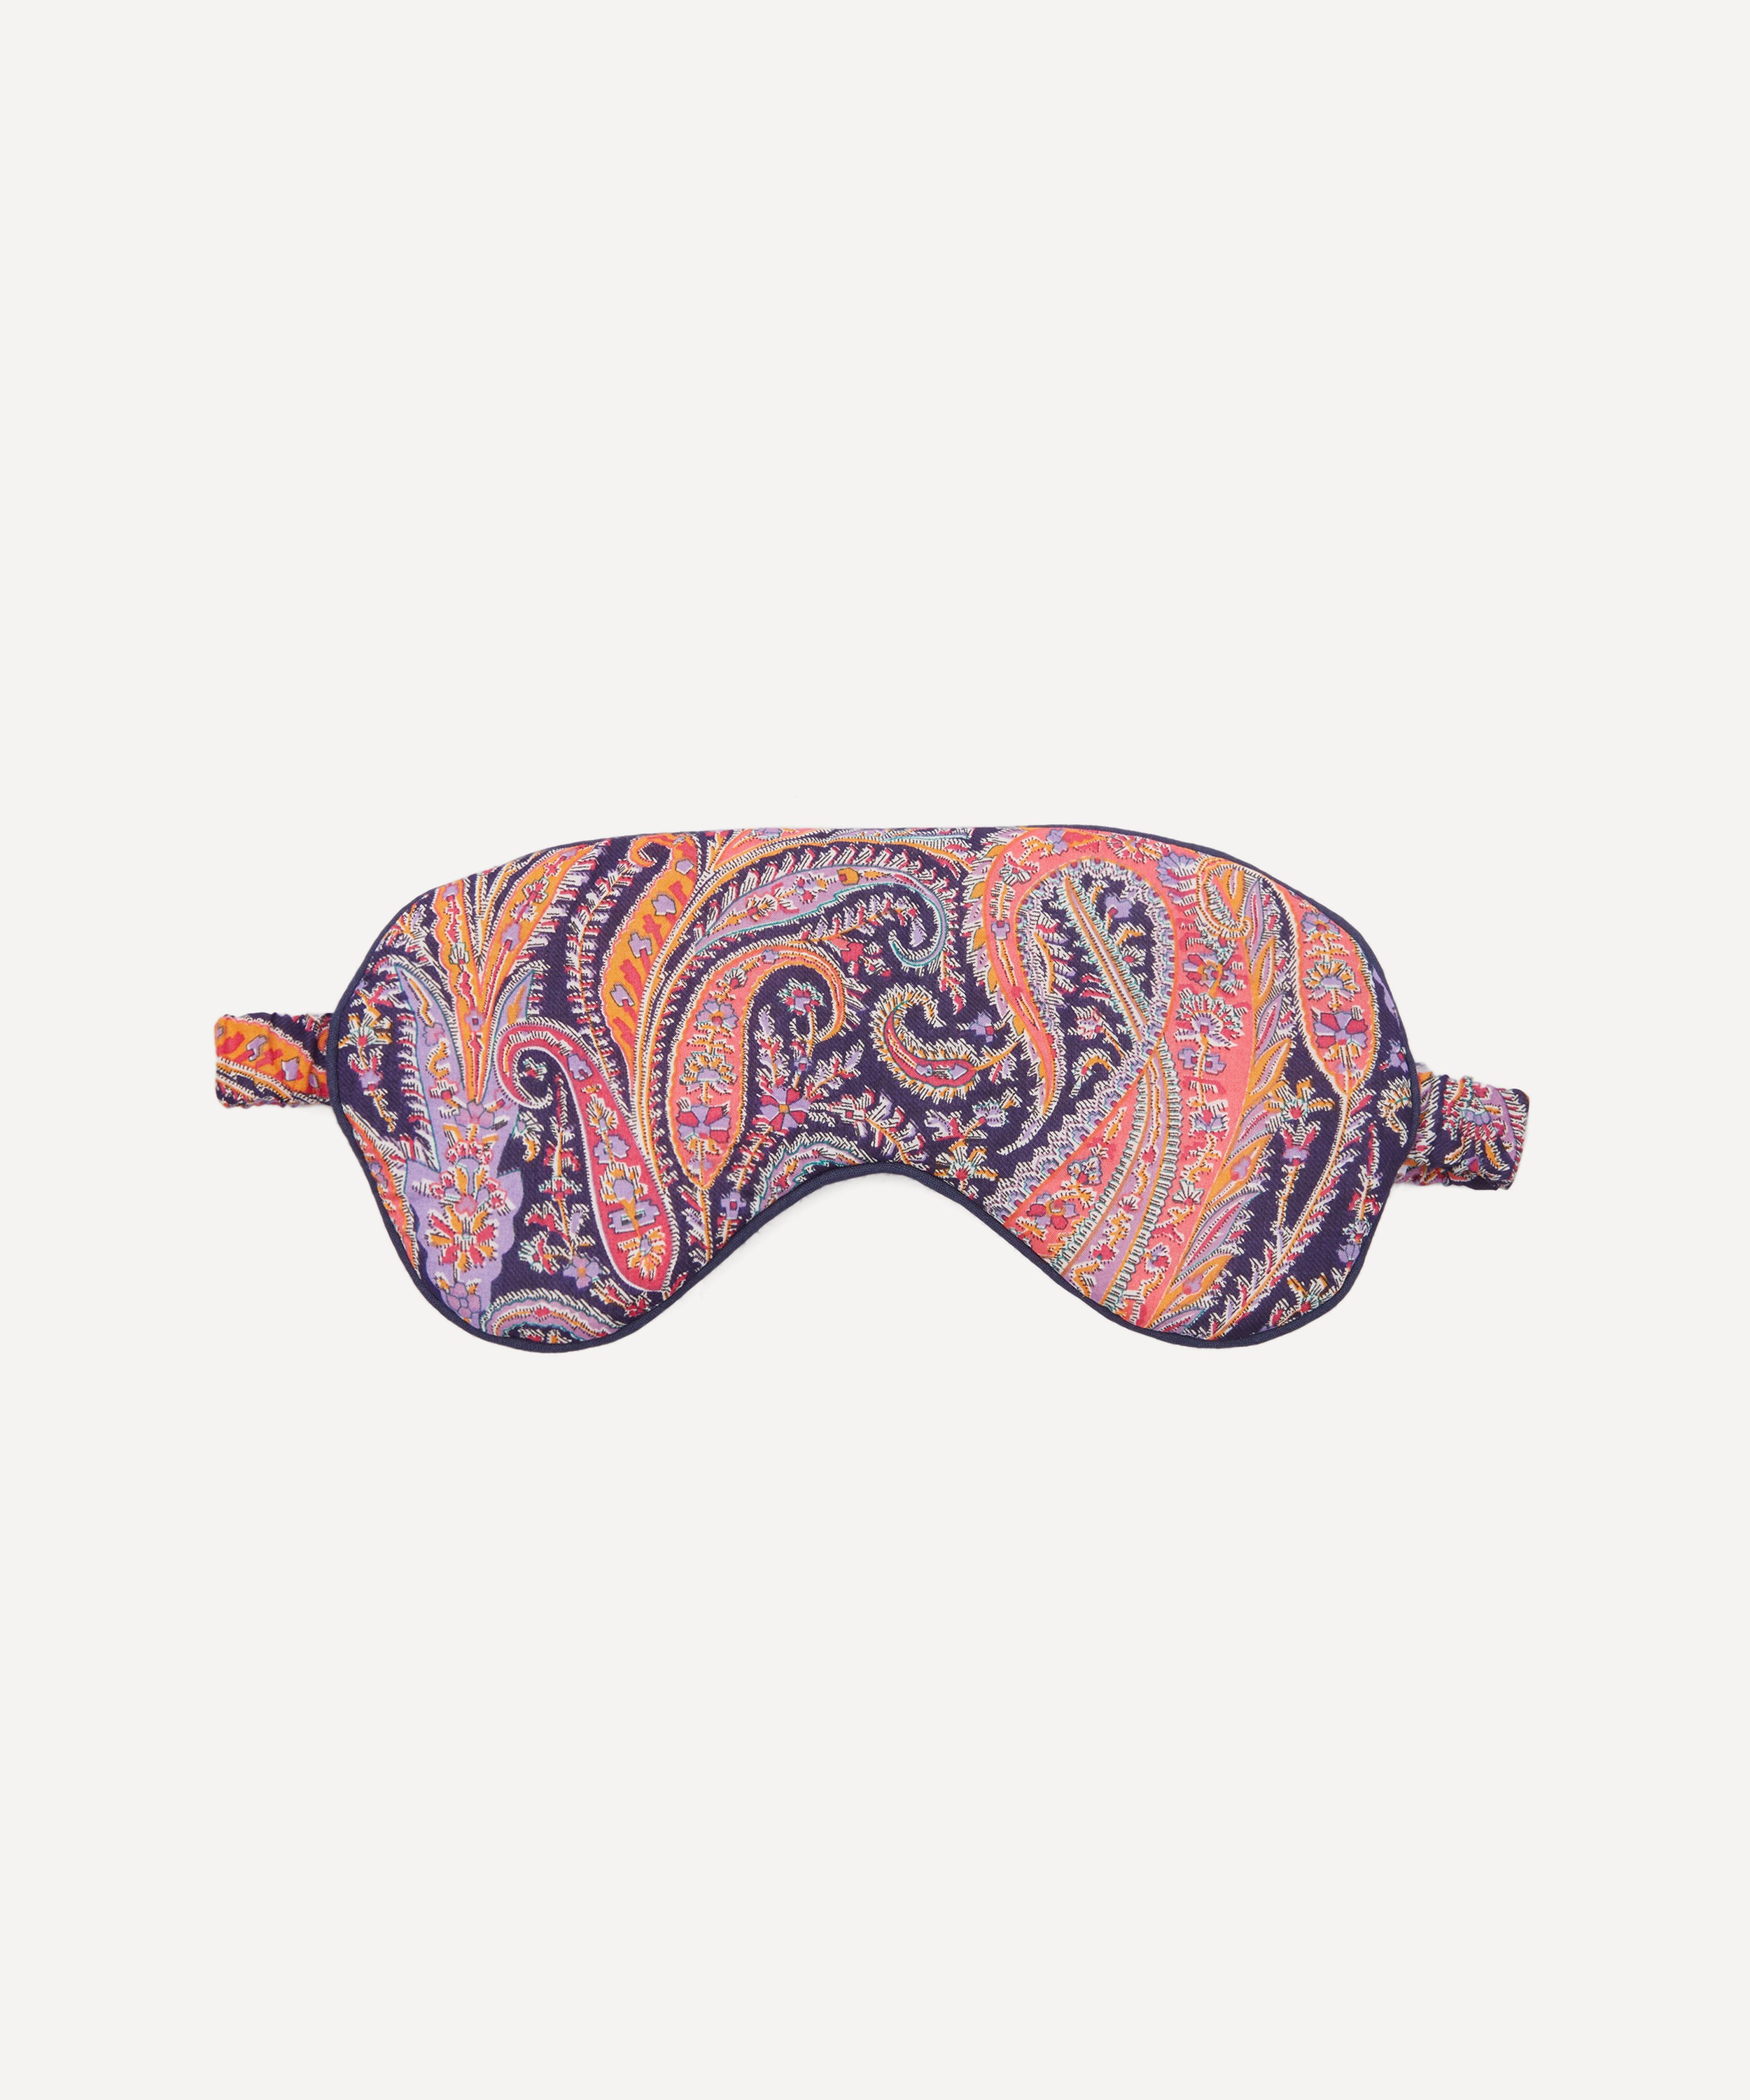 Liberty - Felix and Isabelle Tana Lawn™ Cotton Eye Mask image number 0